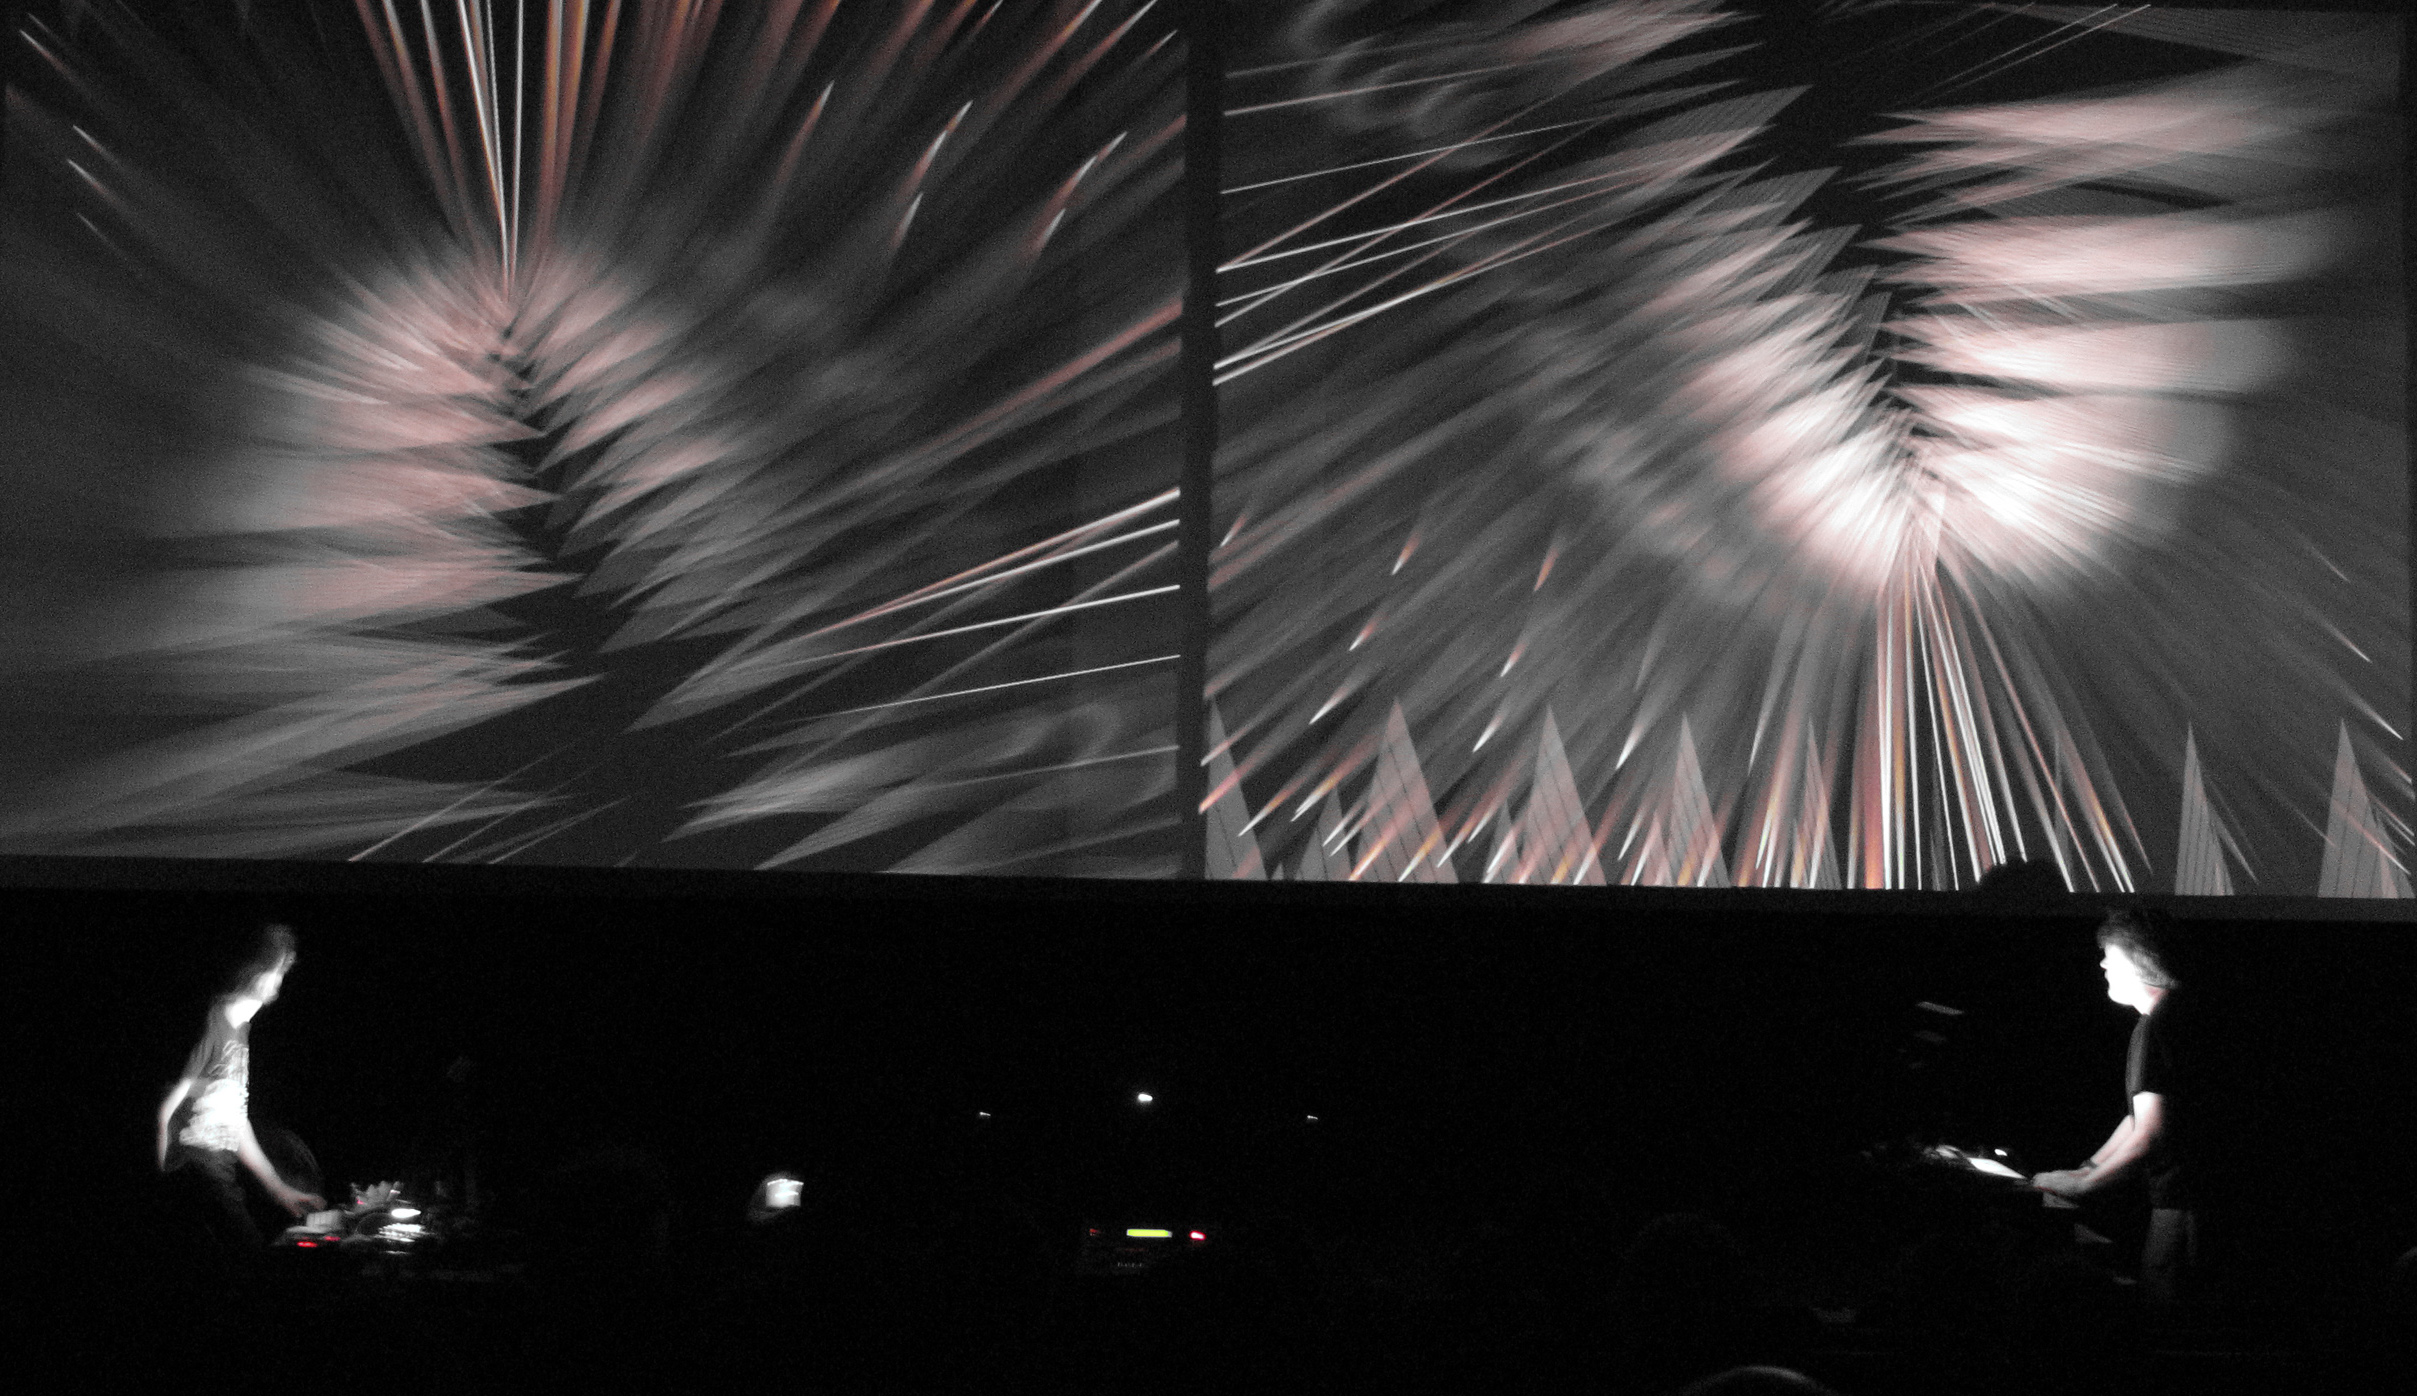 NoiseFold performs Alchimia at the Screen